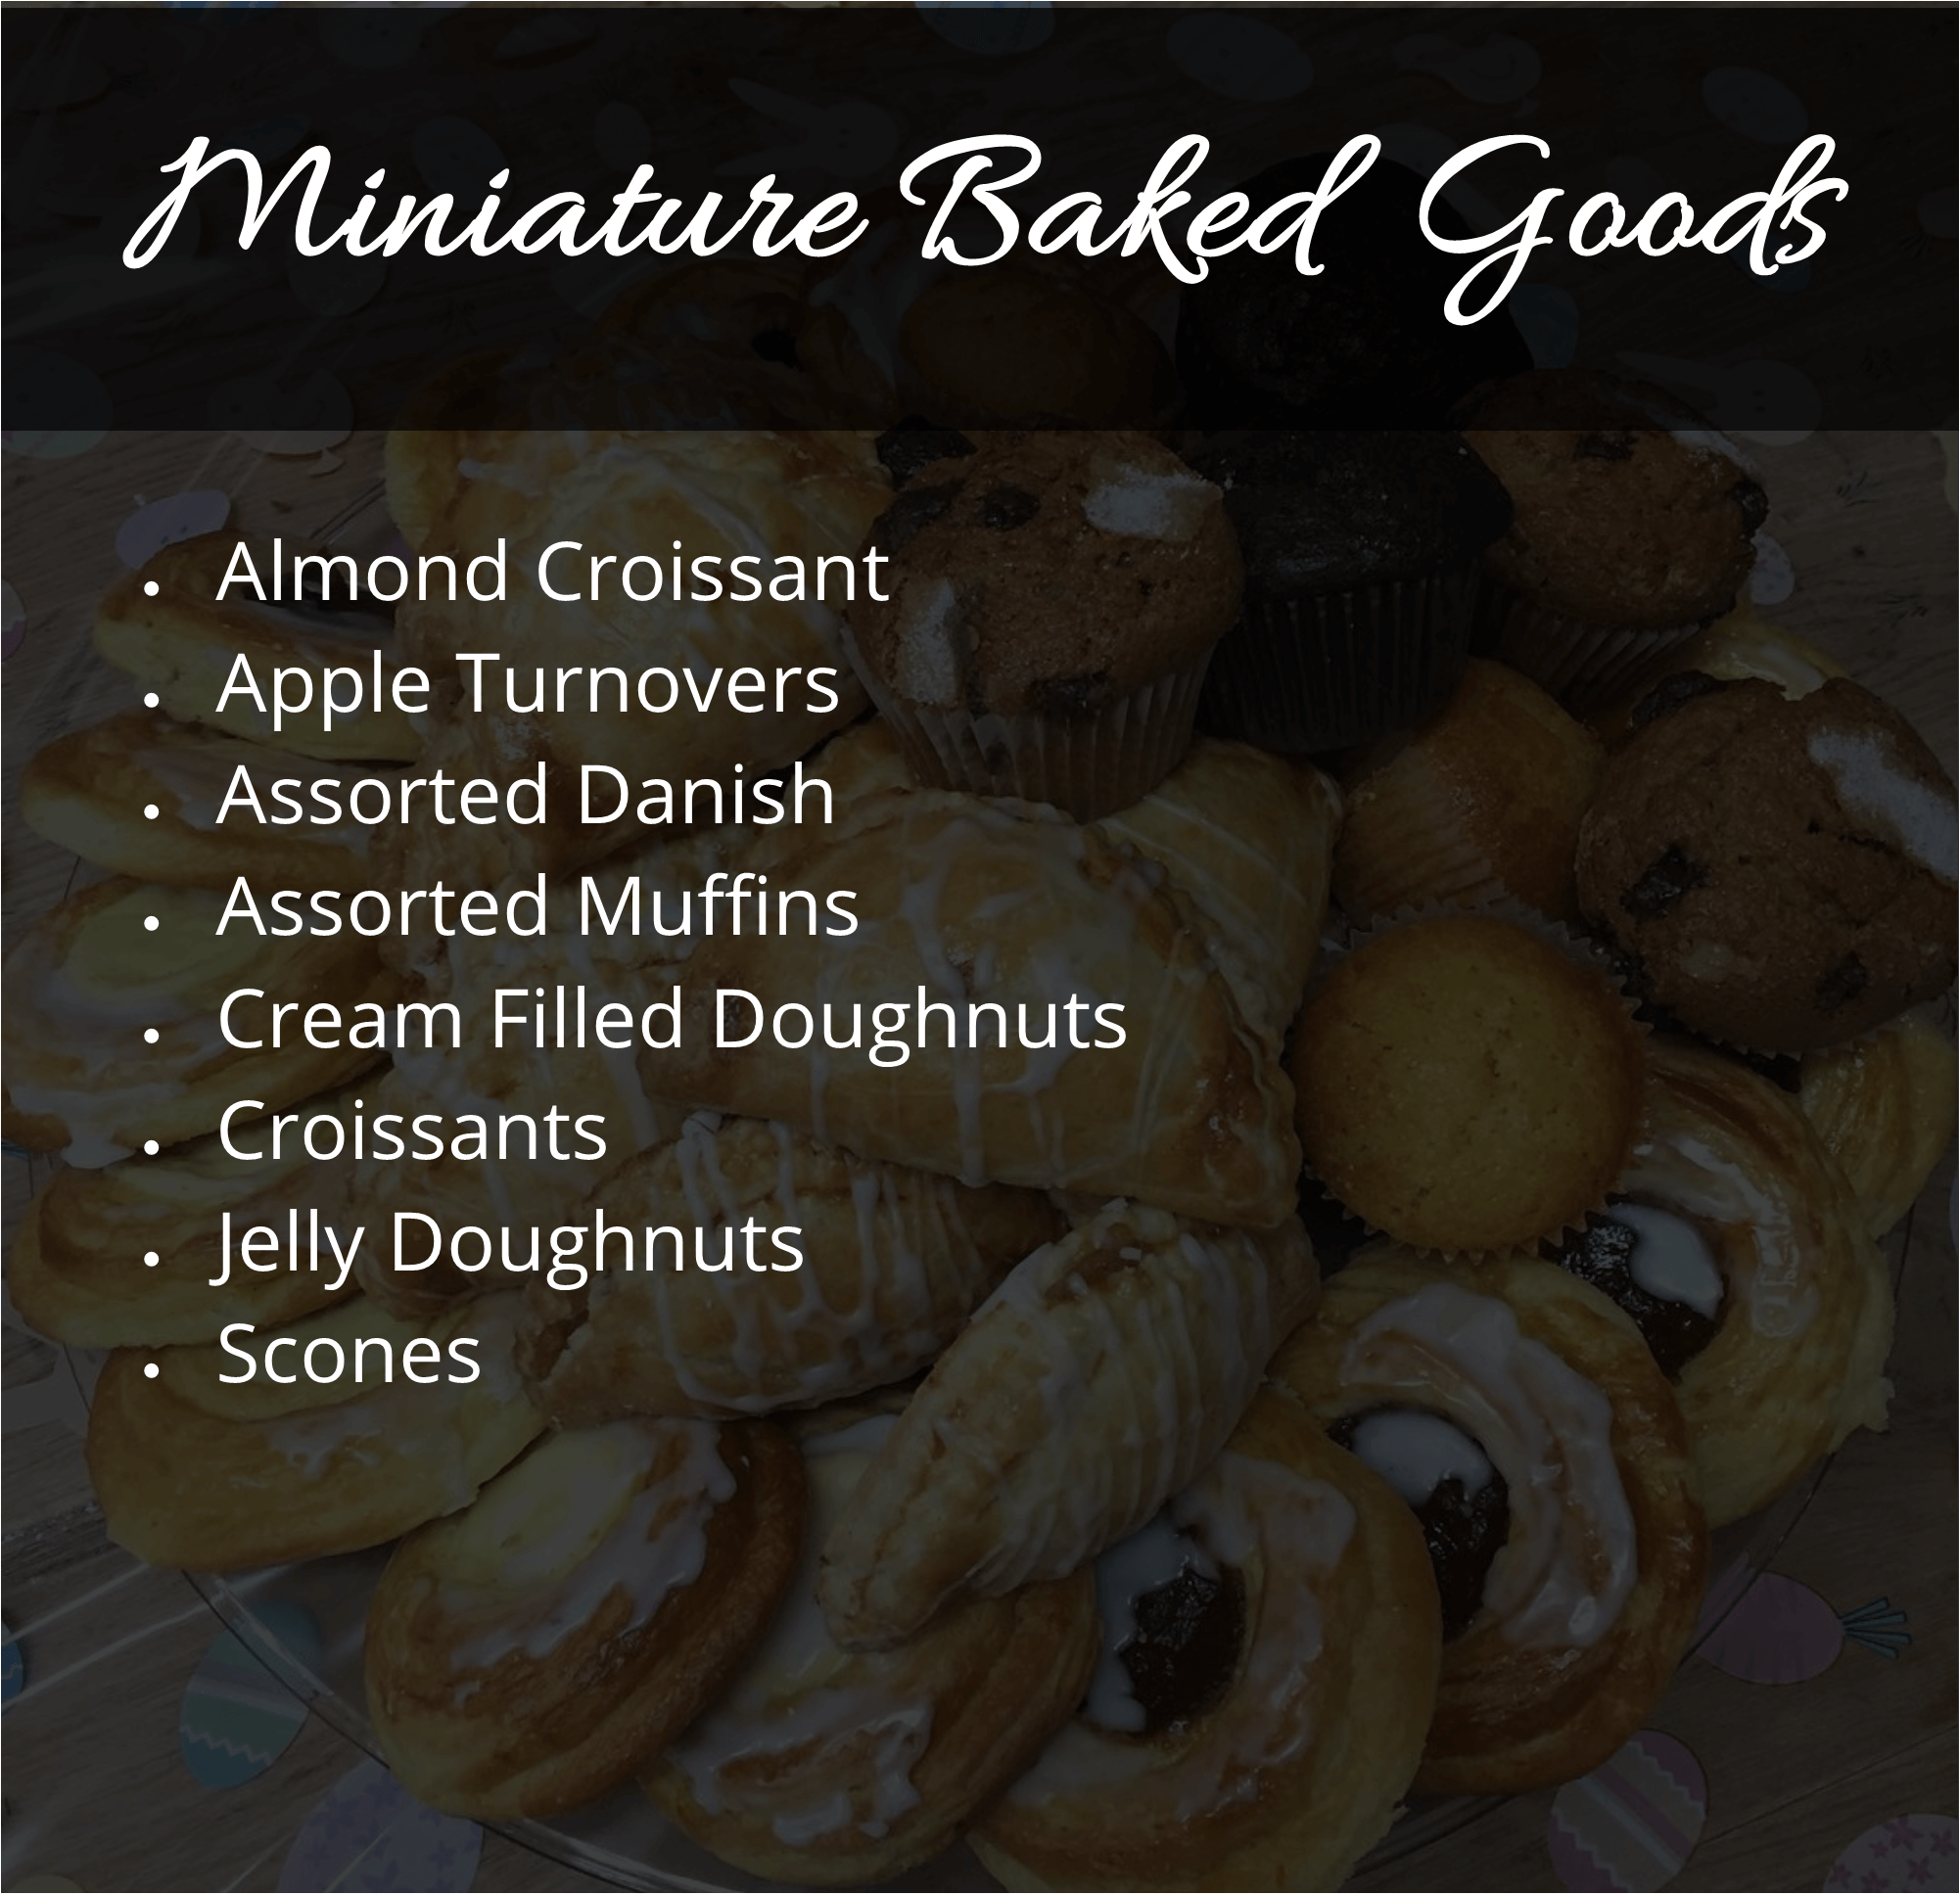 Catering_Menus - Miniature-Baked-Goods-text-1.png